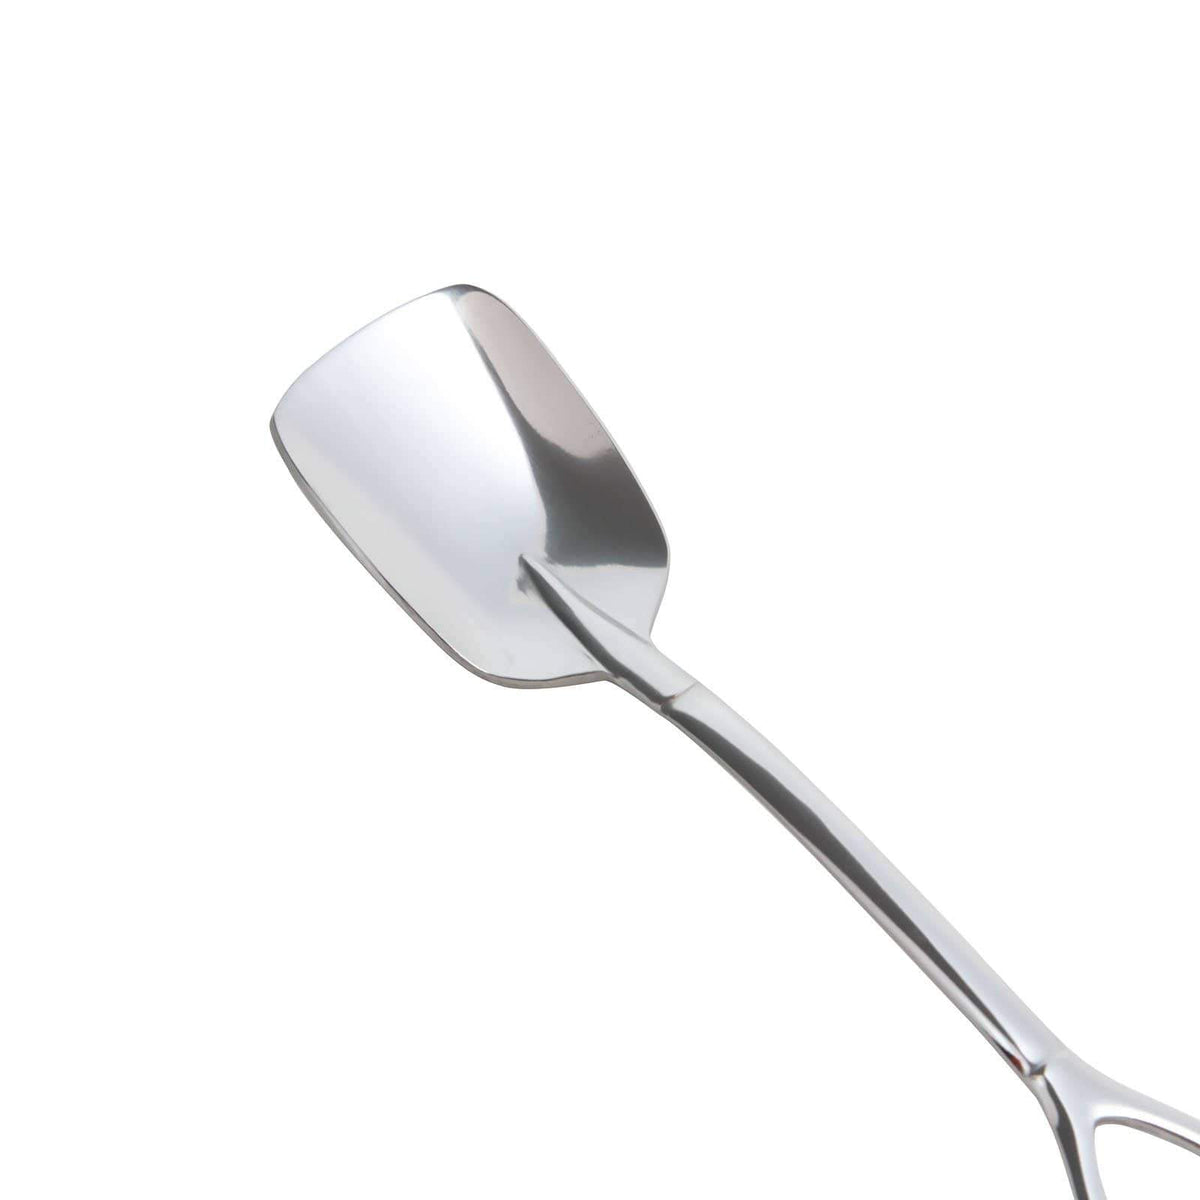 https://www.globalkitchenjapan.com/cdn/shop/products/takeda-garden-shovel-shaped-stainless-steel-ice-cream-spoon-11-5cm-square-head-mirror-finish-loose-cutlery-7416726945875_1200x.jpg?v=1564009978